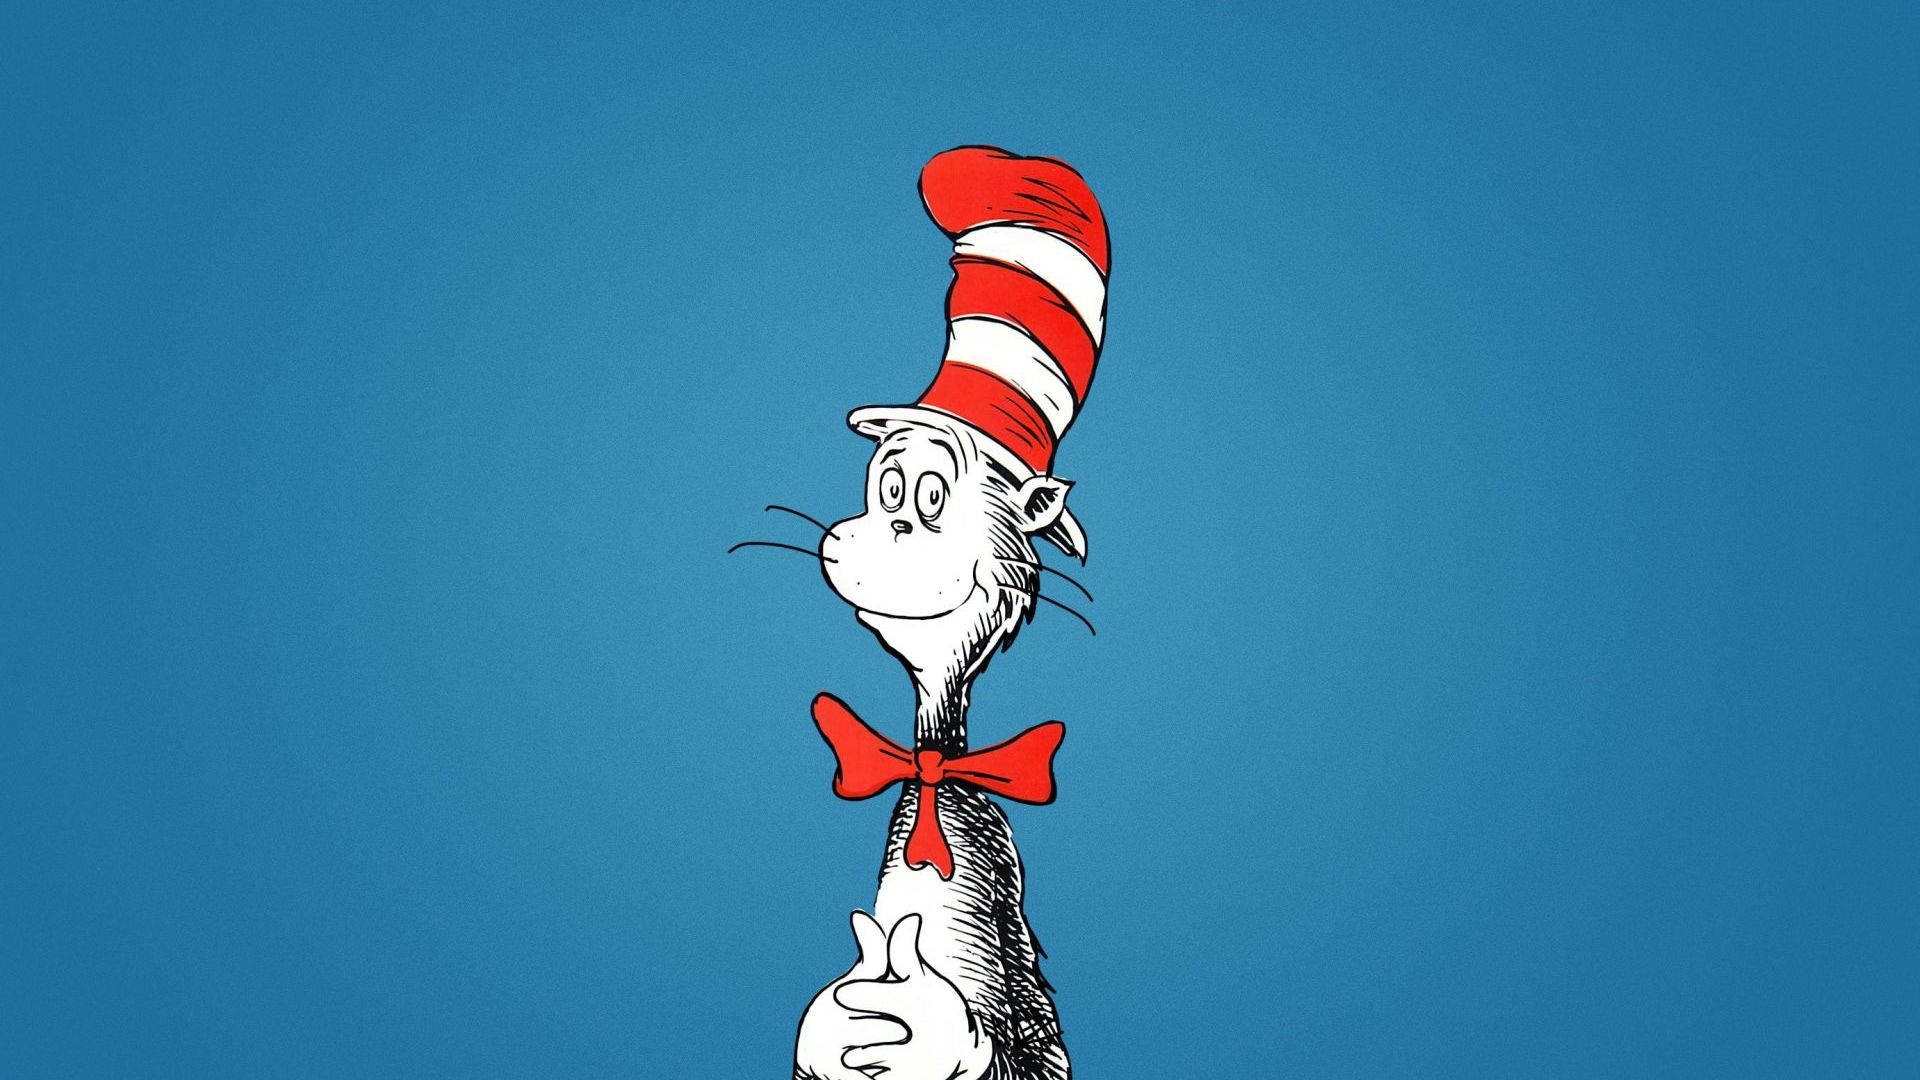 The Cat in the Hat Wallpaper 45133 1920x1080